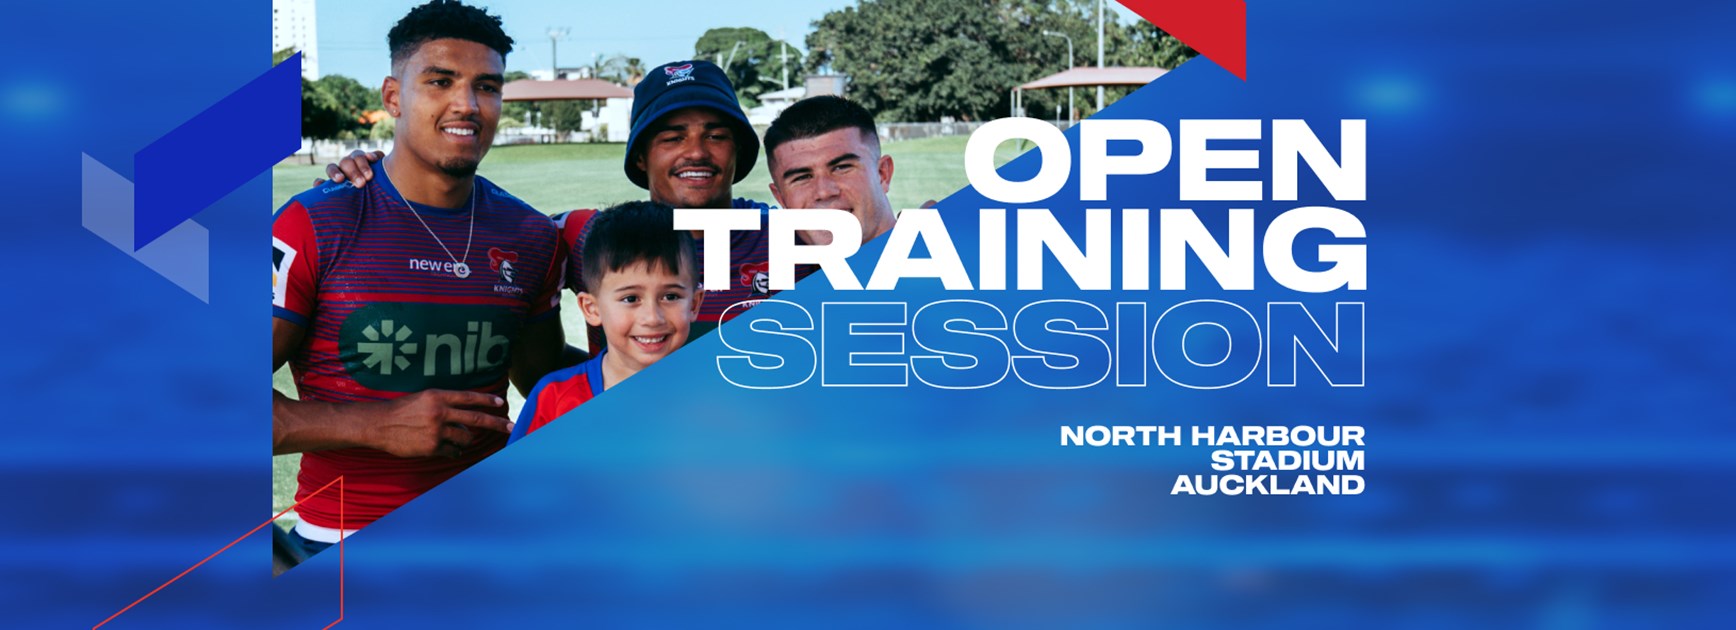 Knights to hold open training session in Auckland